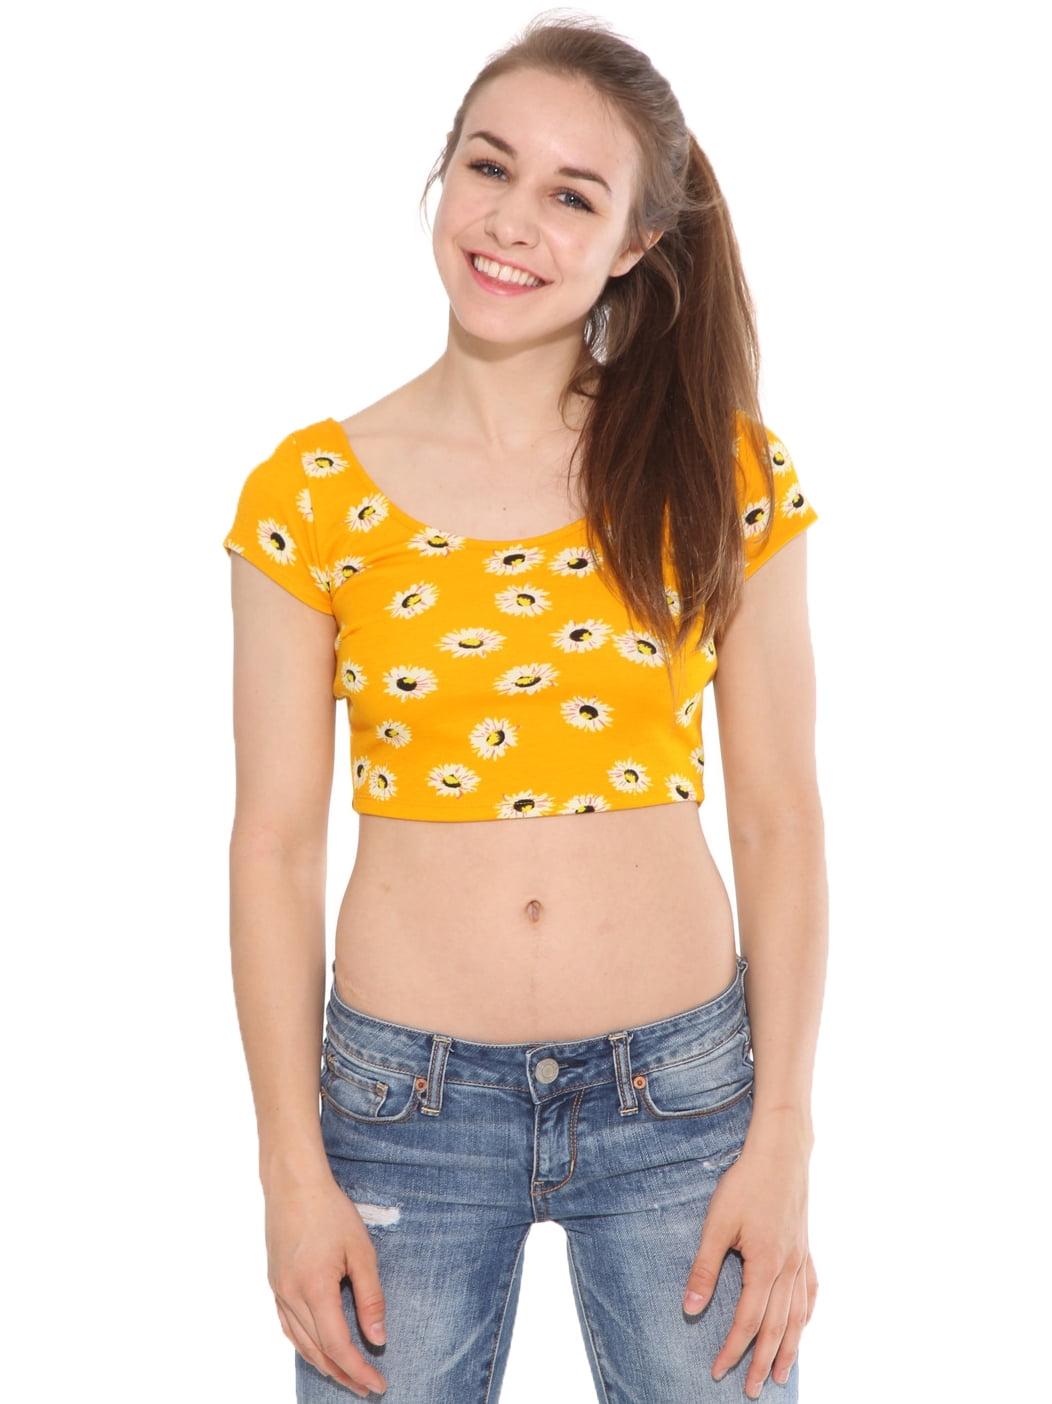 shirts that show your belly button Overall a nice pair of slippers. 